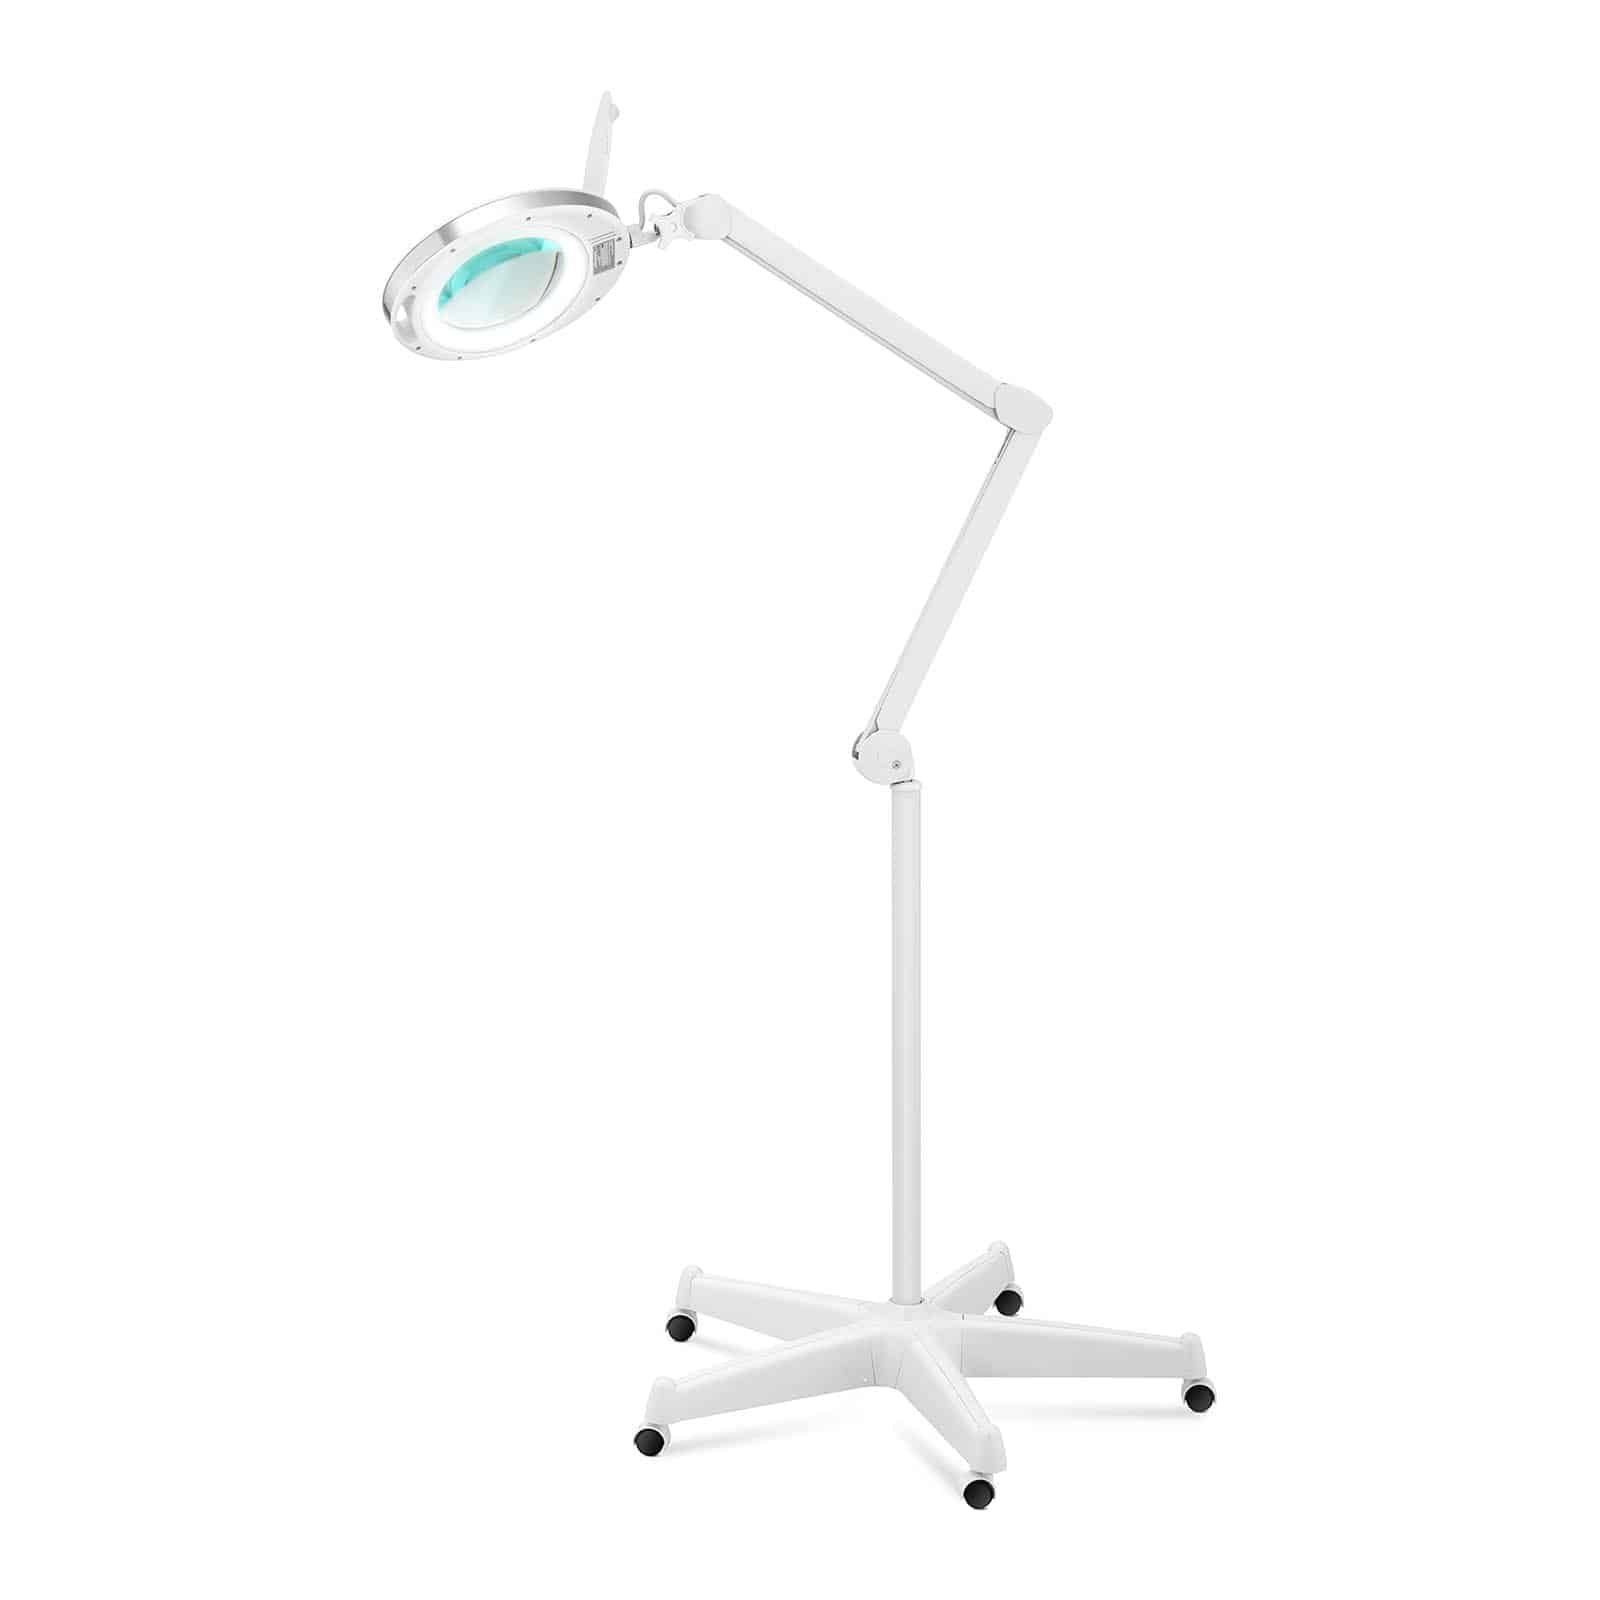 Physa Lupenlampe Lupenleuchte 5 dpt Lupenlampe 10 W LED Lupenleuchte 820 lm Rollstativ | Lupenleuchten